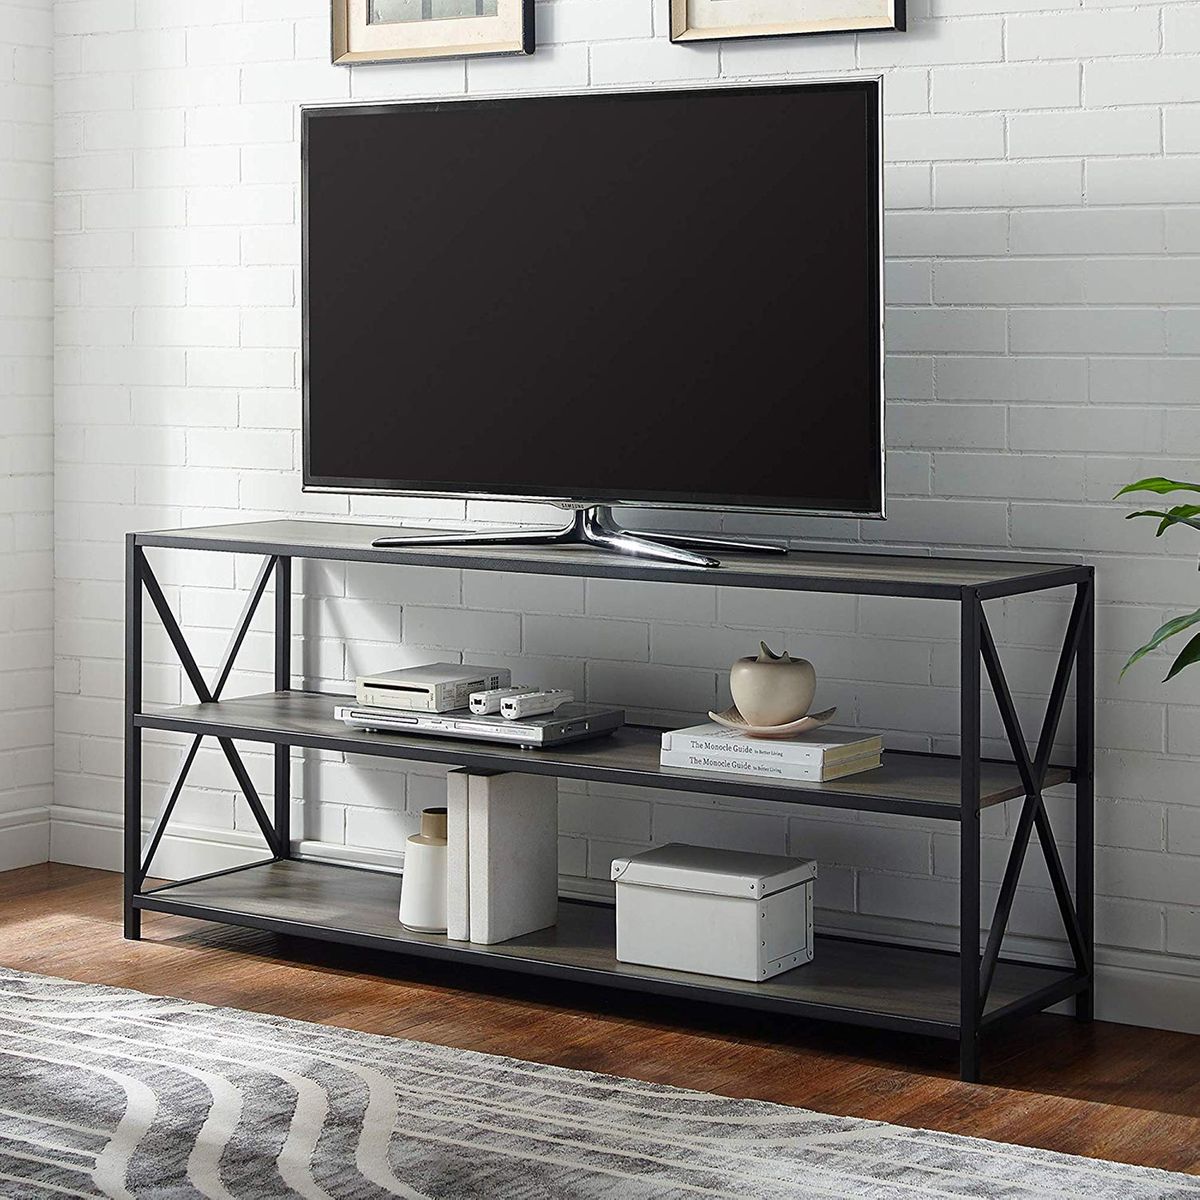 POWERSTONE TV Stand for TVs up to 55 Inch Entertainment Center with 4 Storage Open Shelves Modern TV Console Table Wooden TV Table for Living Room and Bedroom 